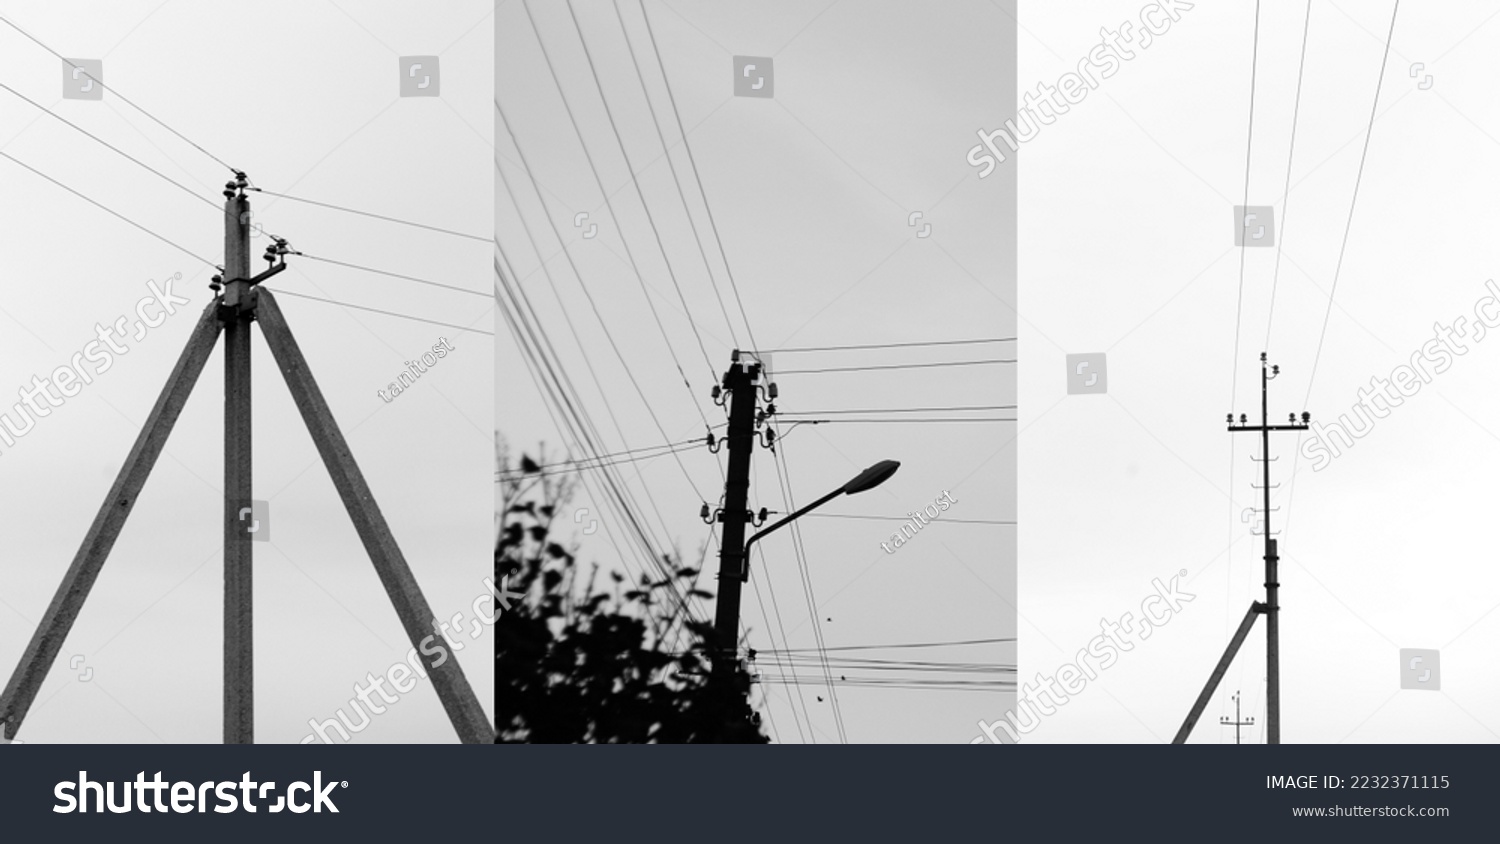 Blackout – power grid overloaded. Blackout concept. Earth hour. Burning flame candle and power lines on background. Energy crisis. Banner design black and white. #2232371115